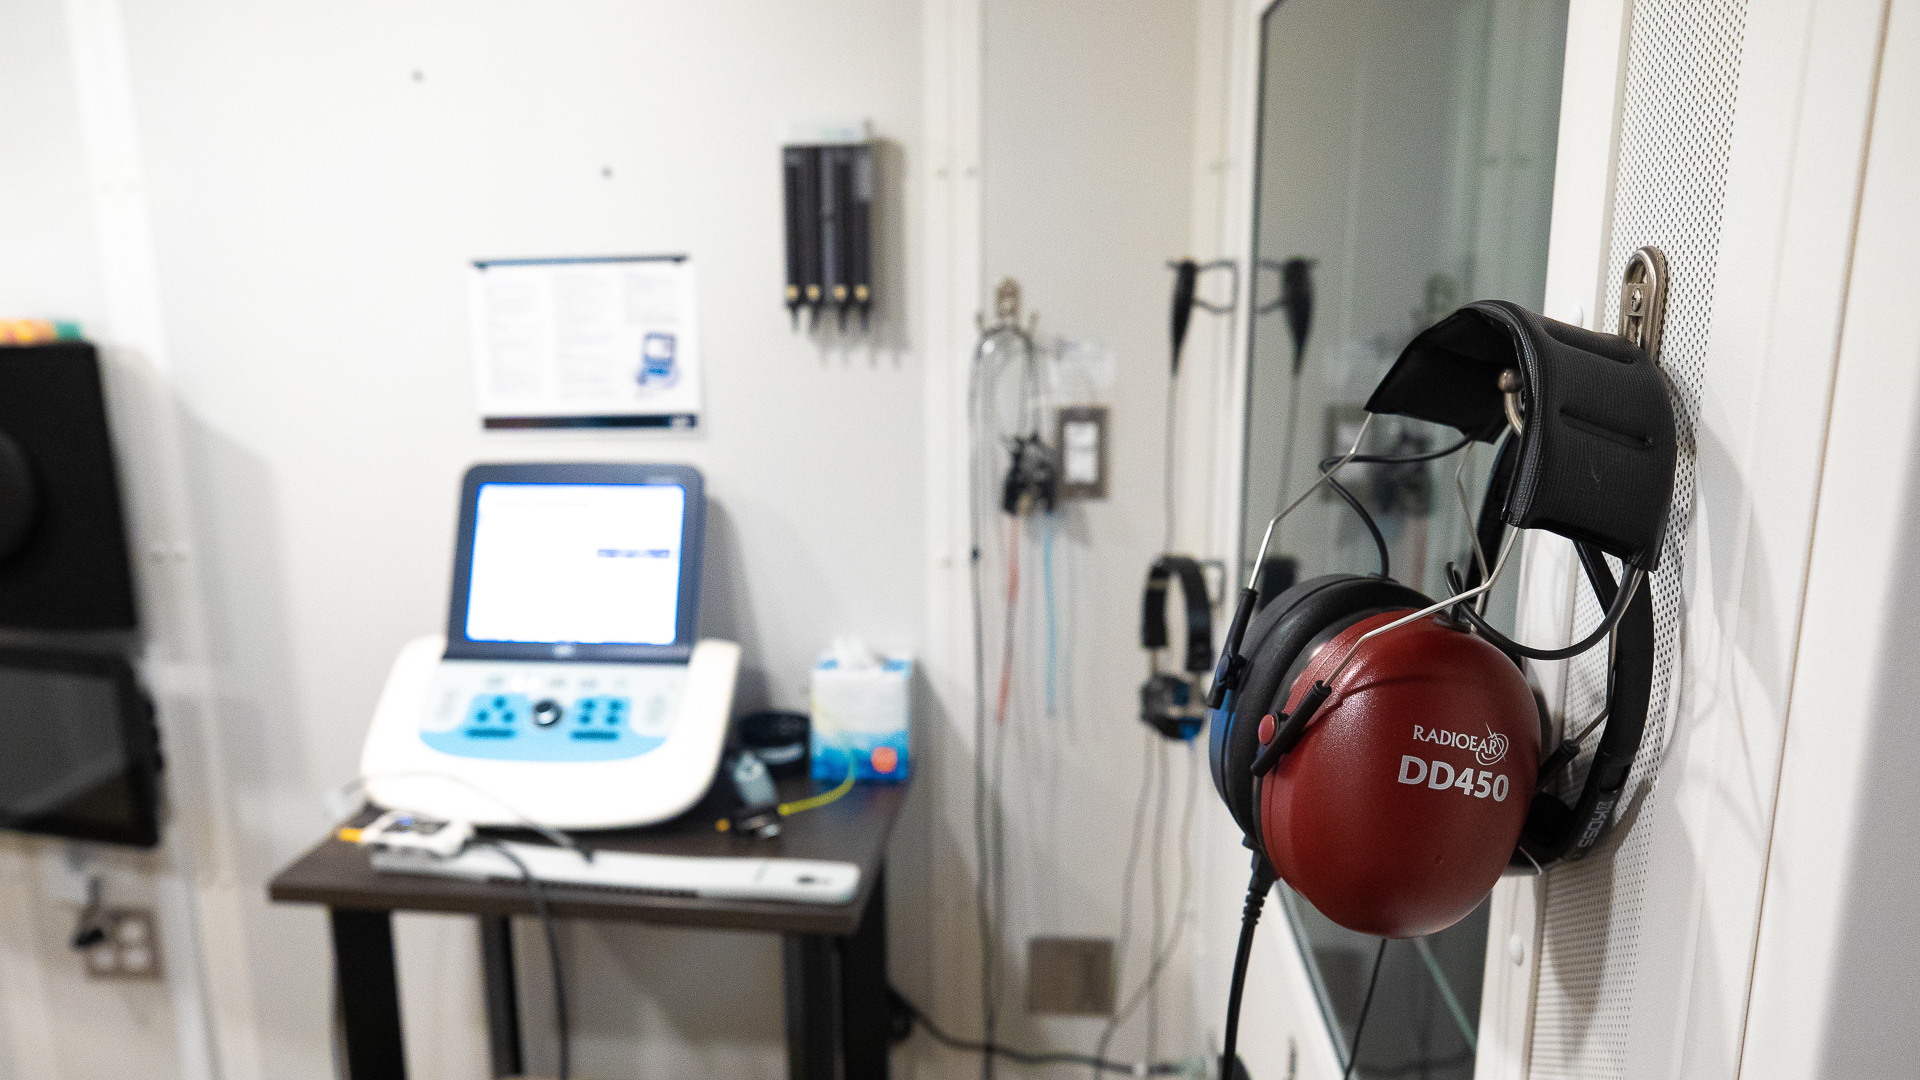 A hearing exam room, with a large set of red headphones on the wall and computer in the background